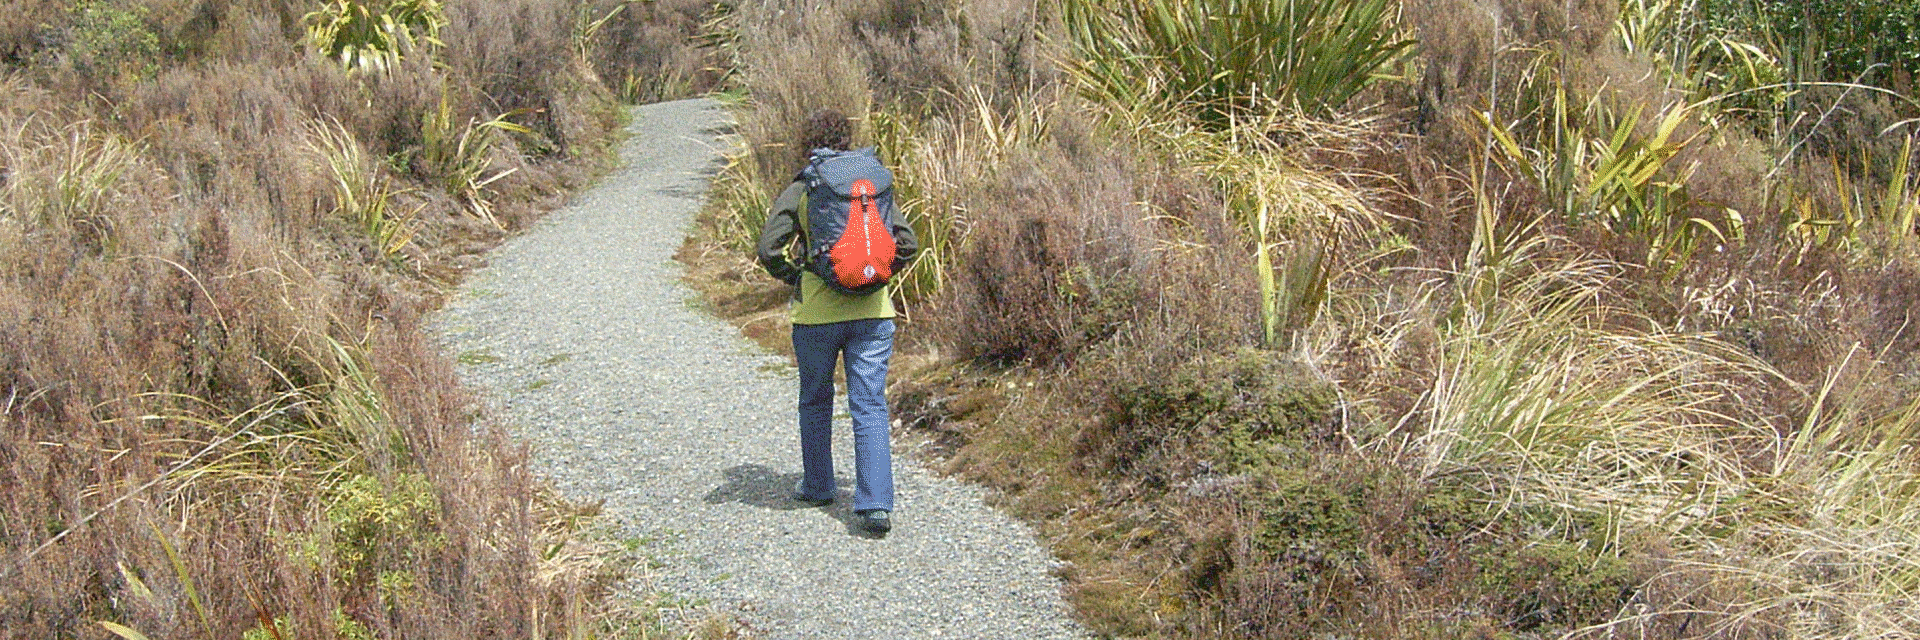 hiking with stylin waterproof backpack